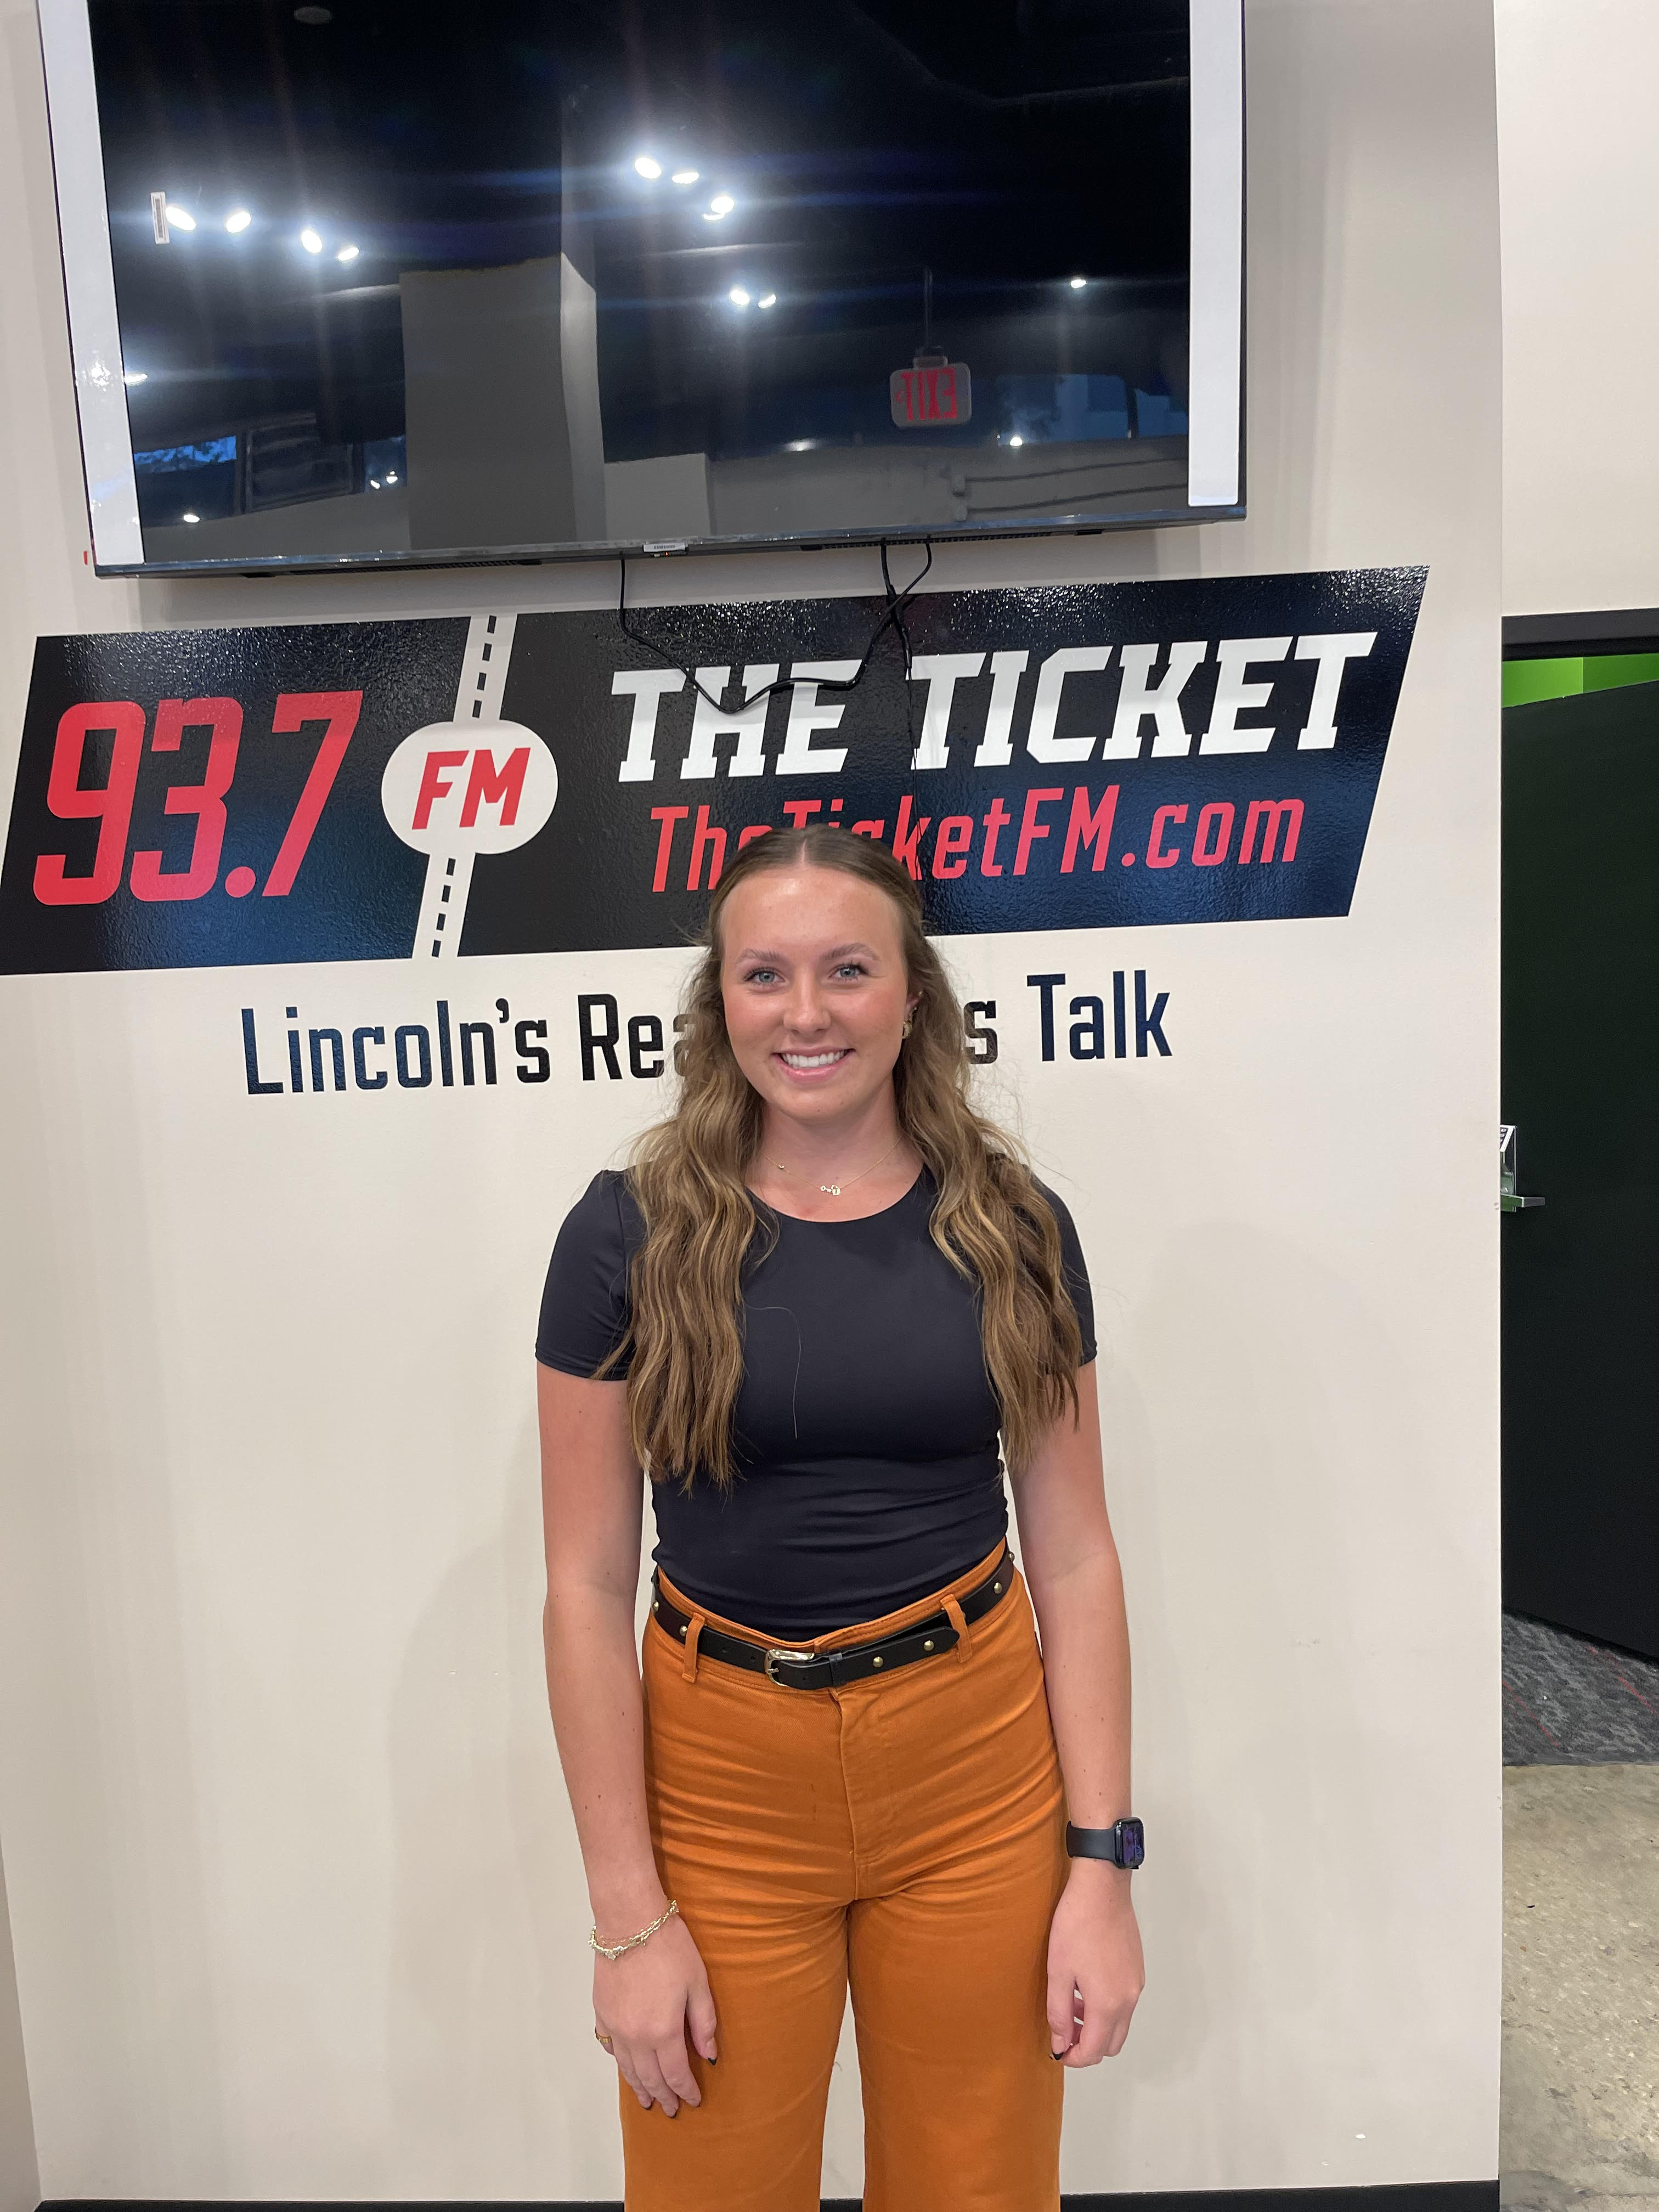 Grace Schroller, who has long, curled brown hair and wears a black tshirt and orange pants, stands in front of a sign for 93.7 The Ticket.